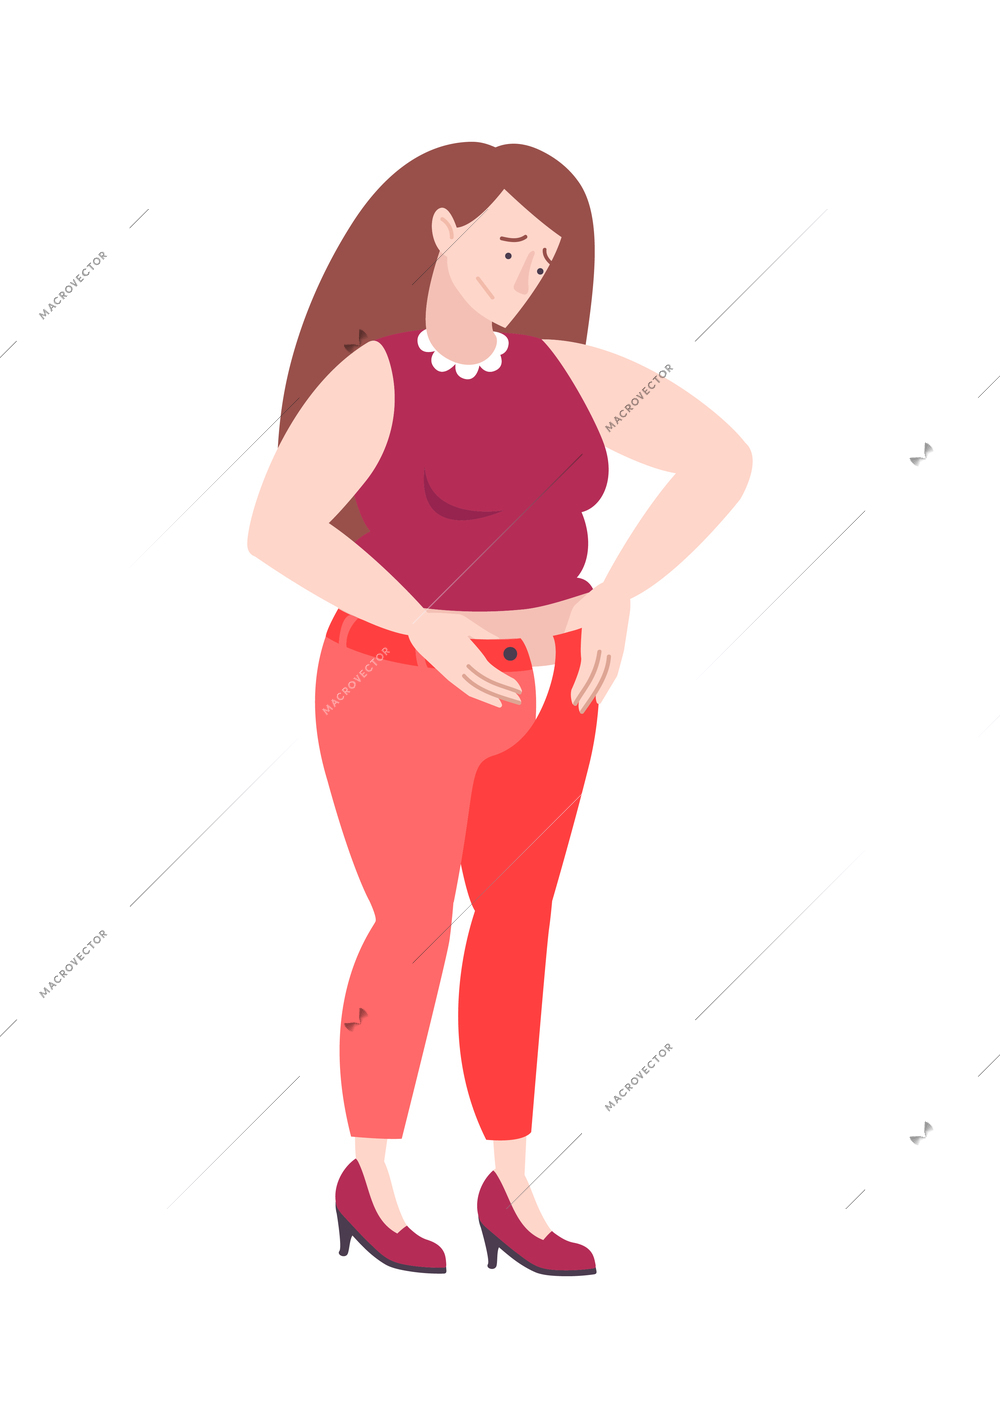 Fat people obesity composition with isolated doodle character of woman touching belly vector illustration